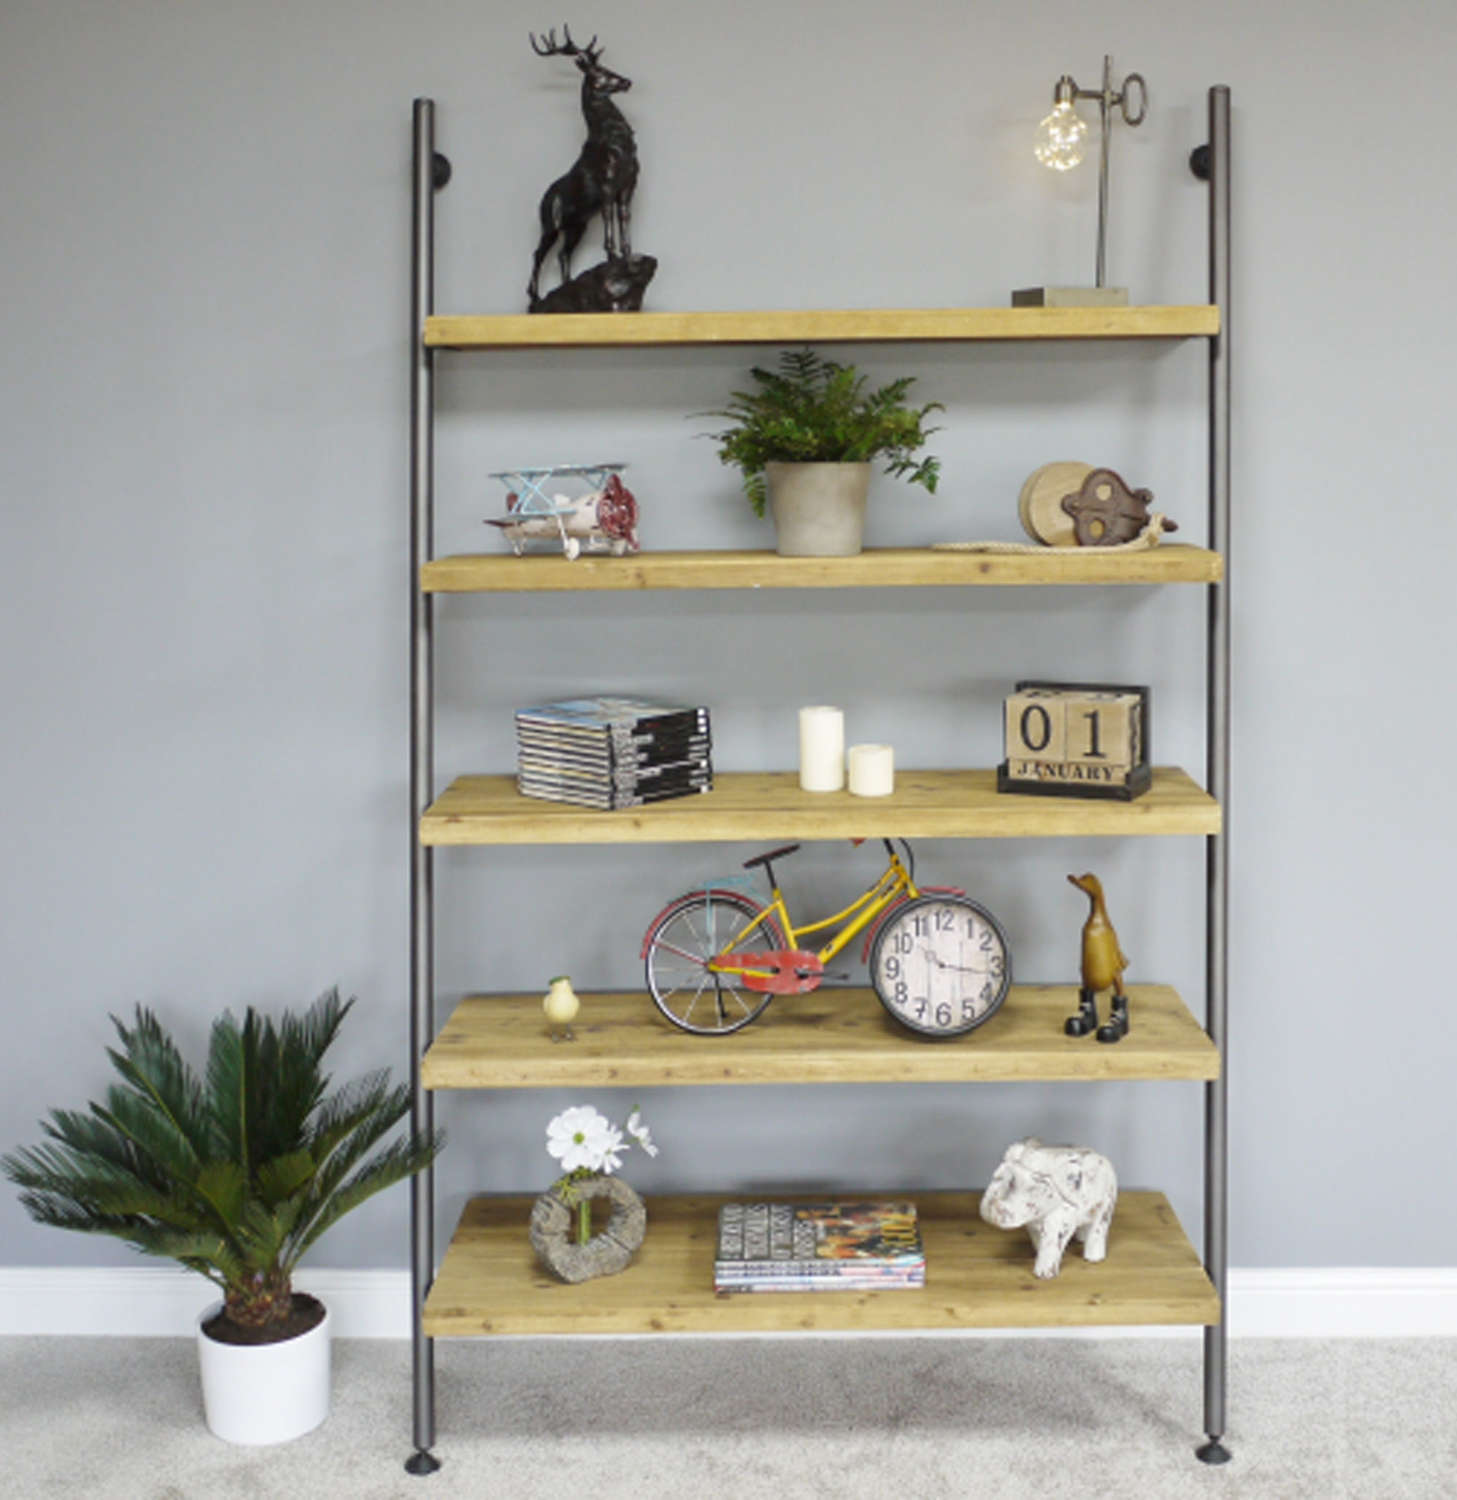 Urban industrial style wide ladder shelving unit